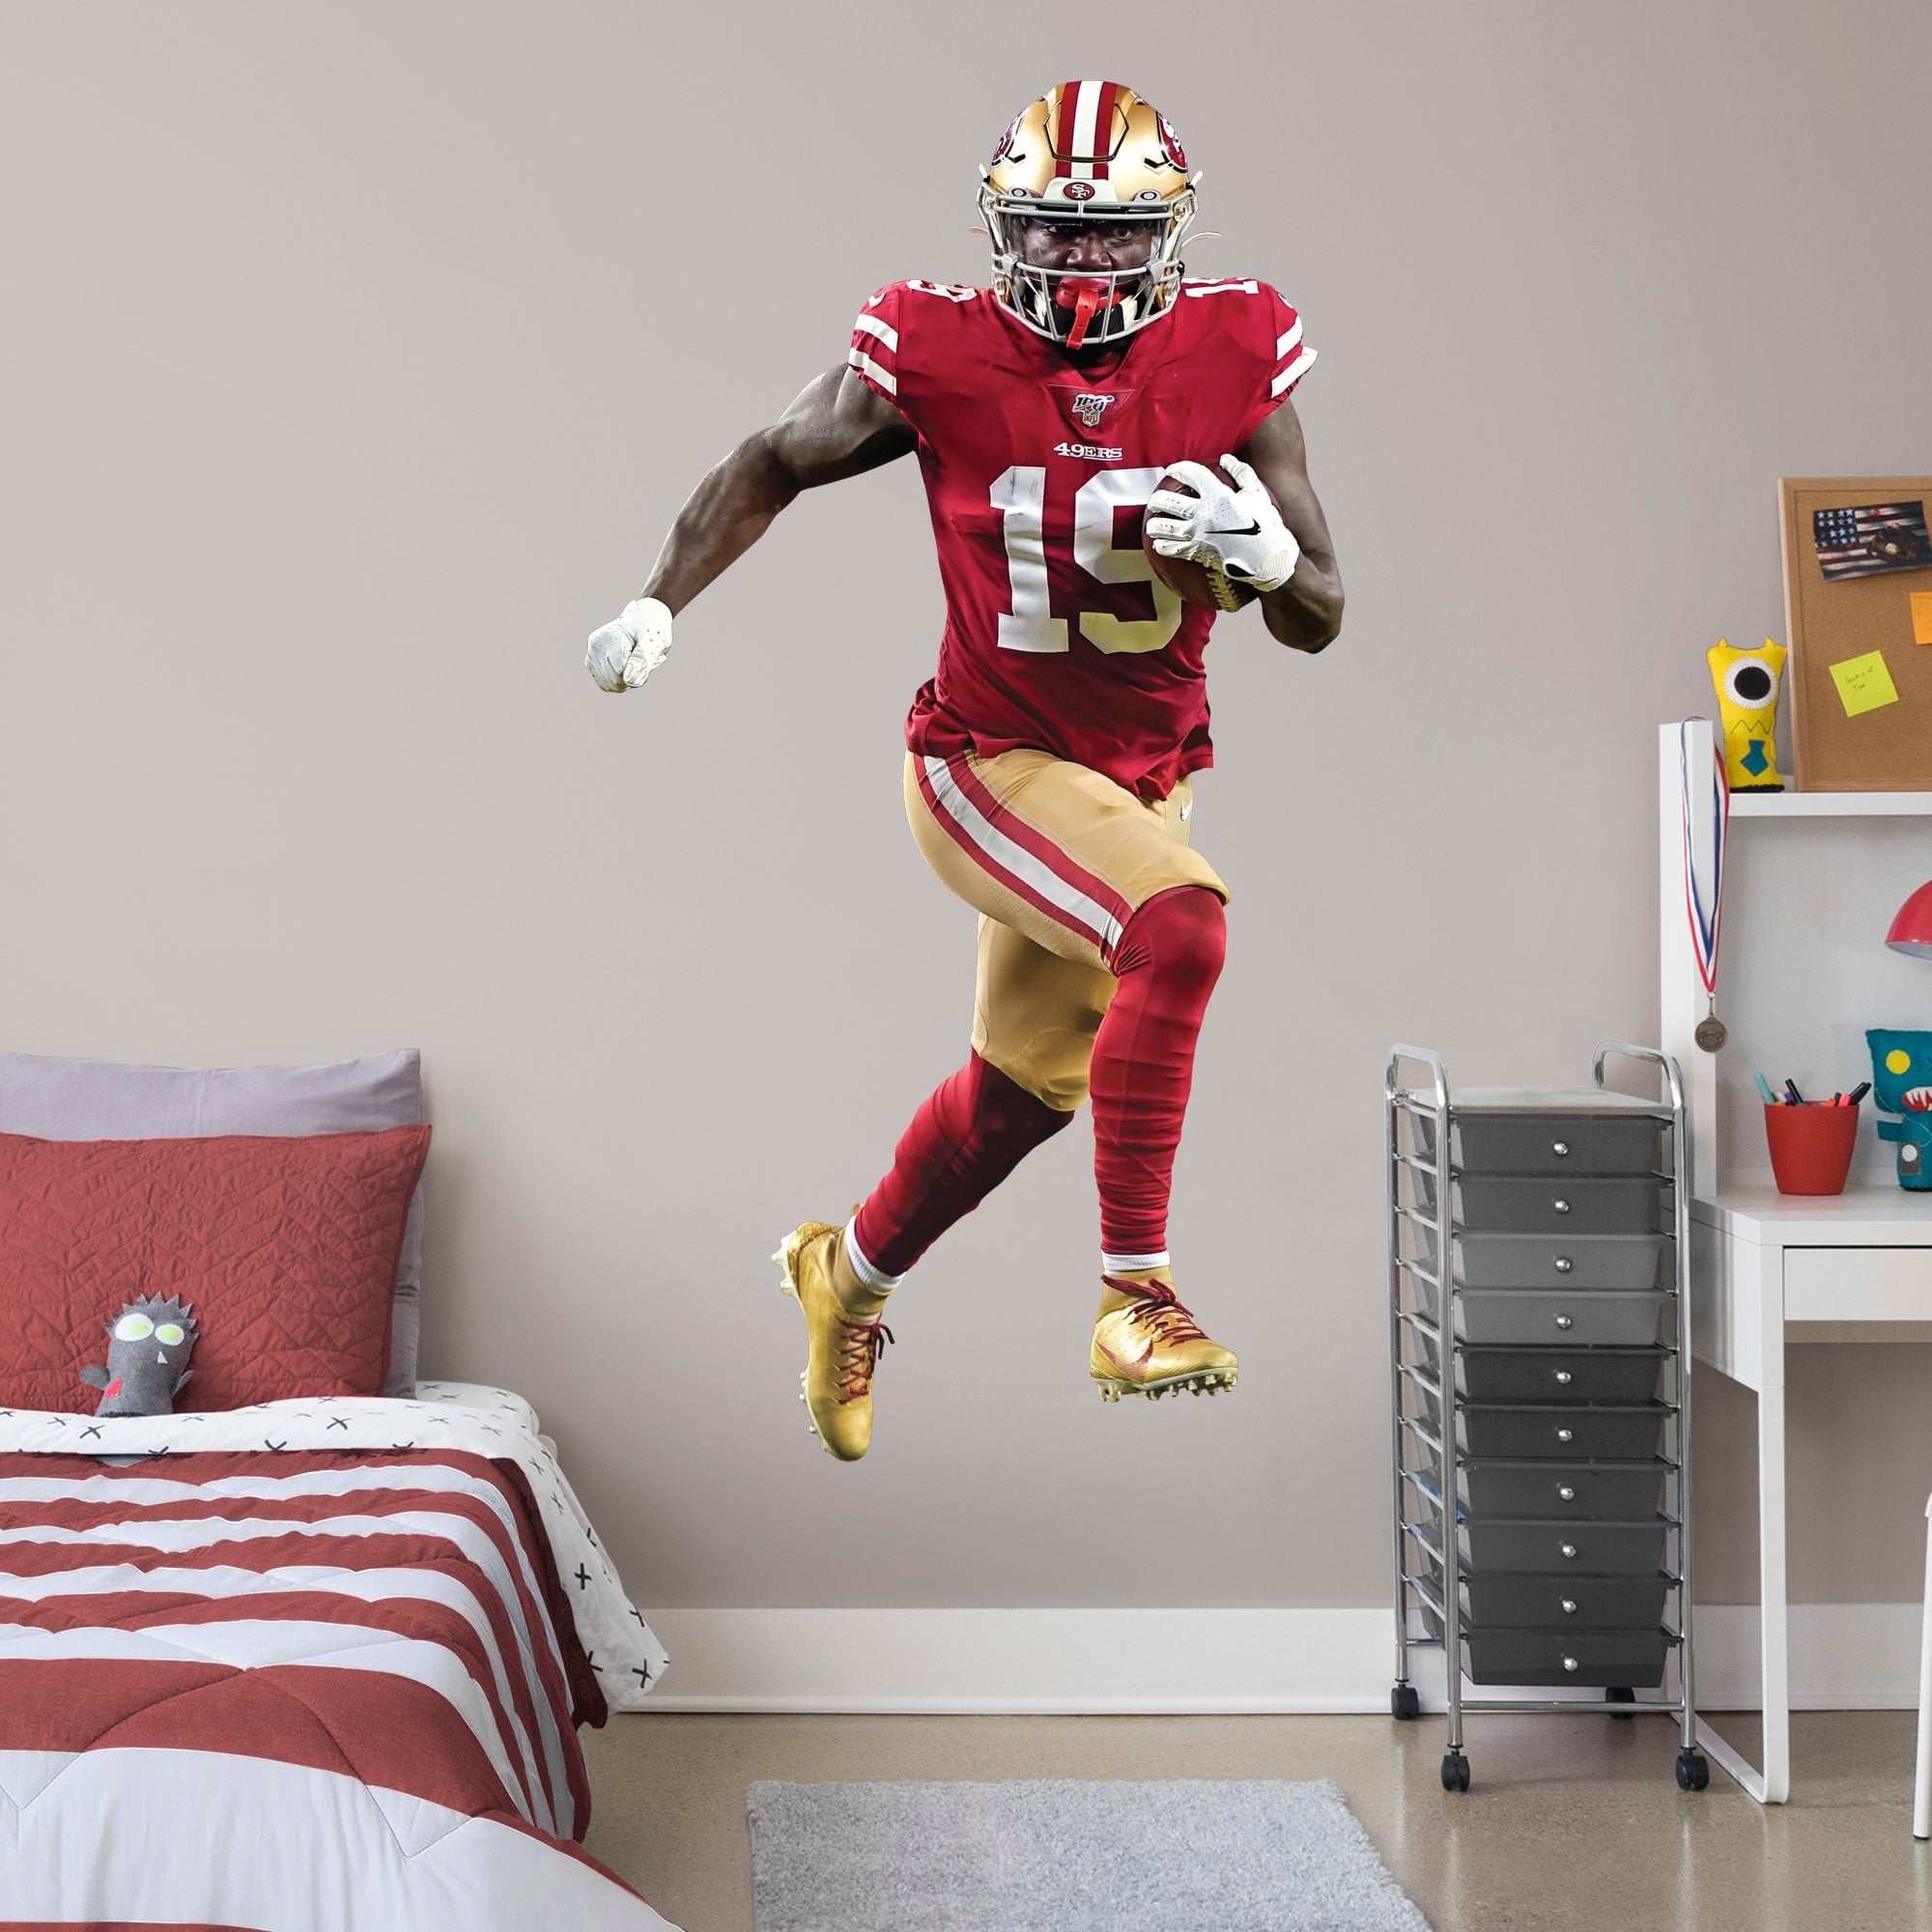 Deebo Samuel for San Francisco 49ers - Officially Licensed NFL Removable Wall Decal Life-Size Athlete + 2 Decals (42"W x 77"H) b